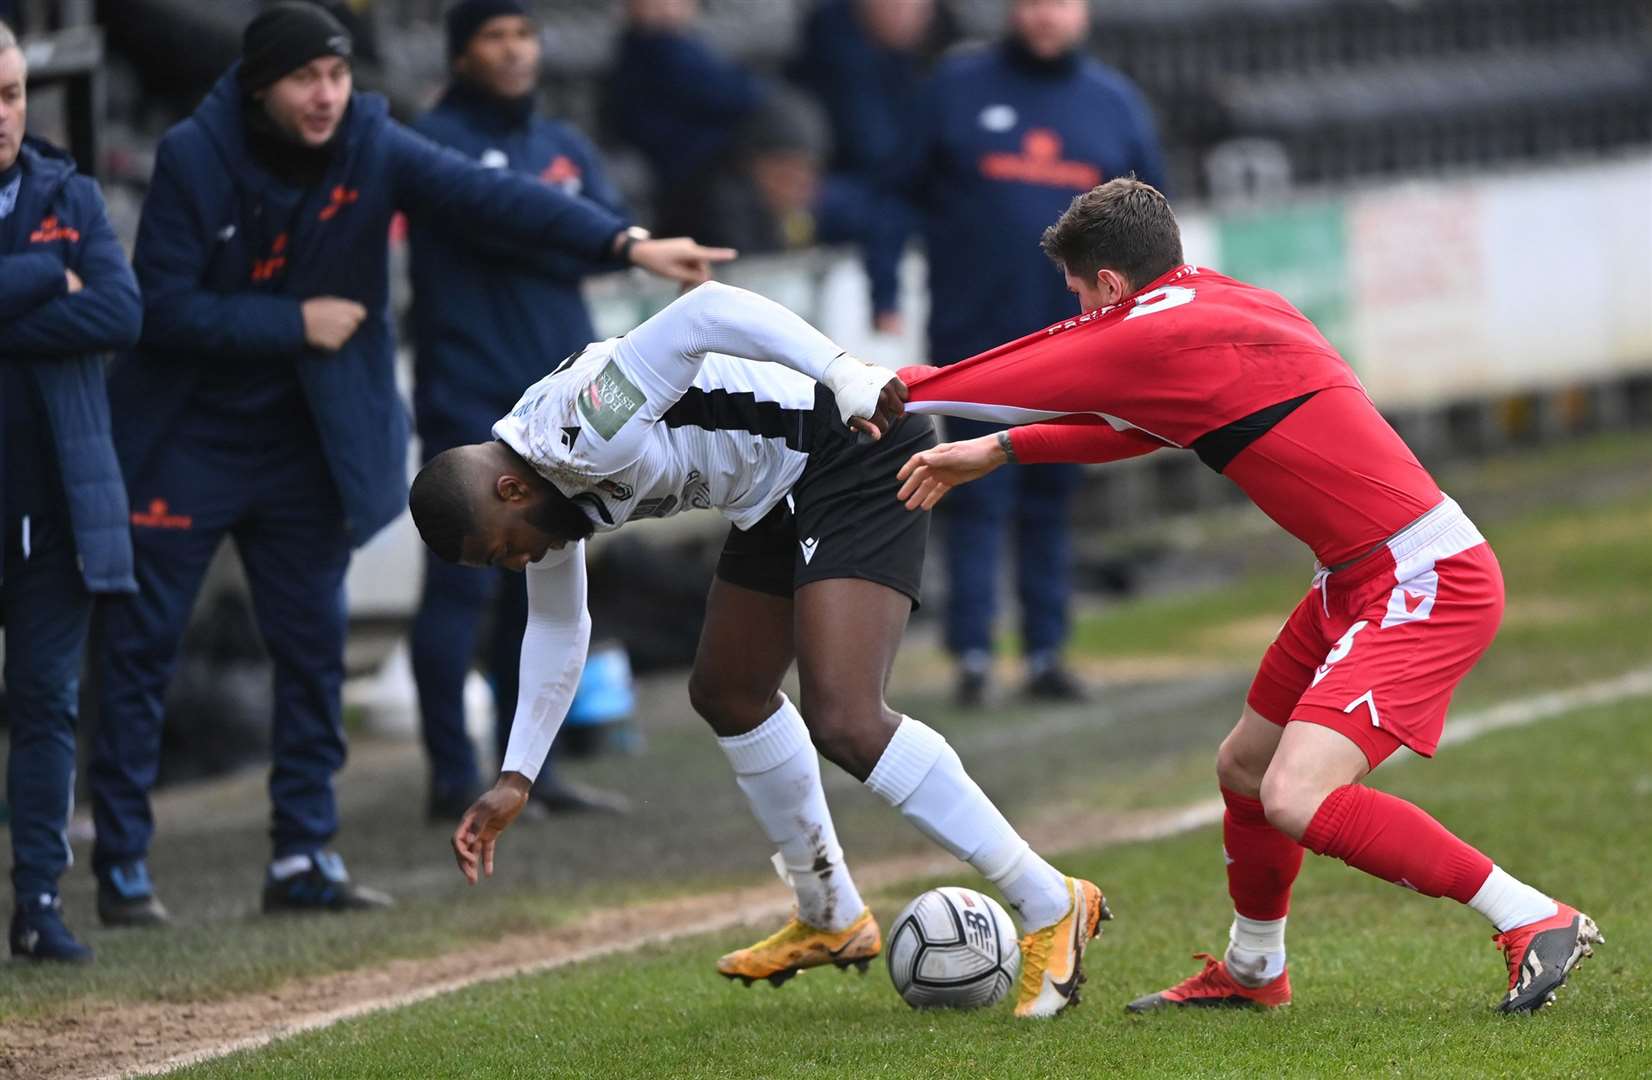 Dartford's Femi Akinwande gets to grips with Hungerford's Curtis Angell. Picture: Keith Gillard (43982279)